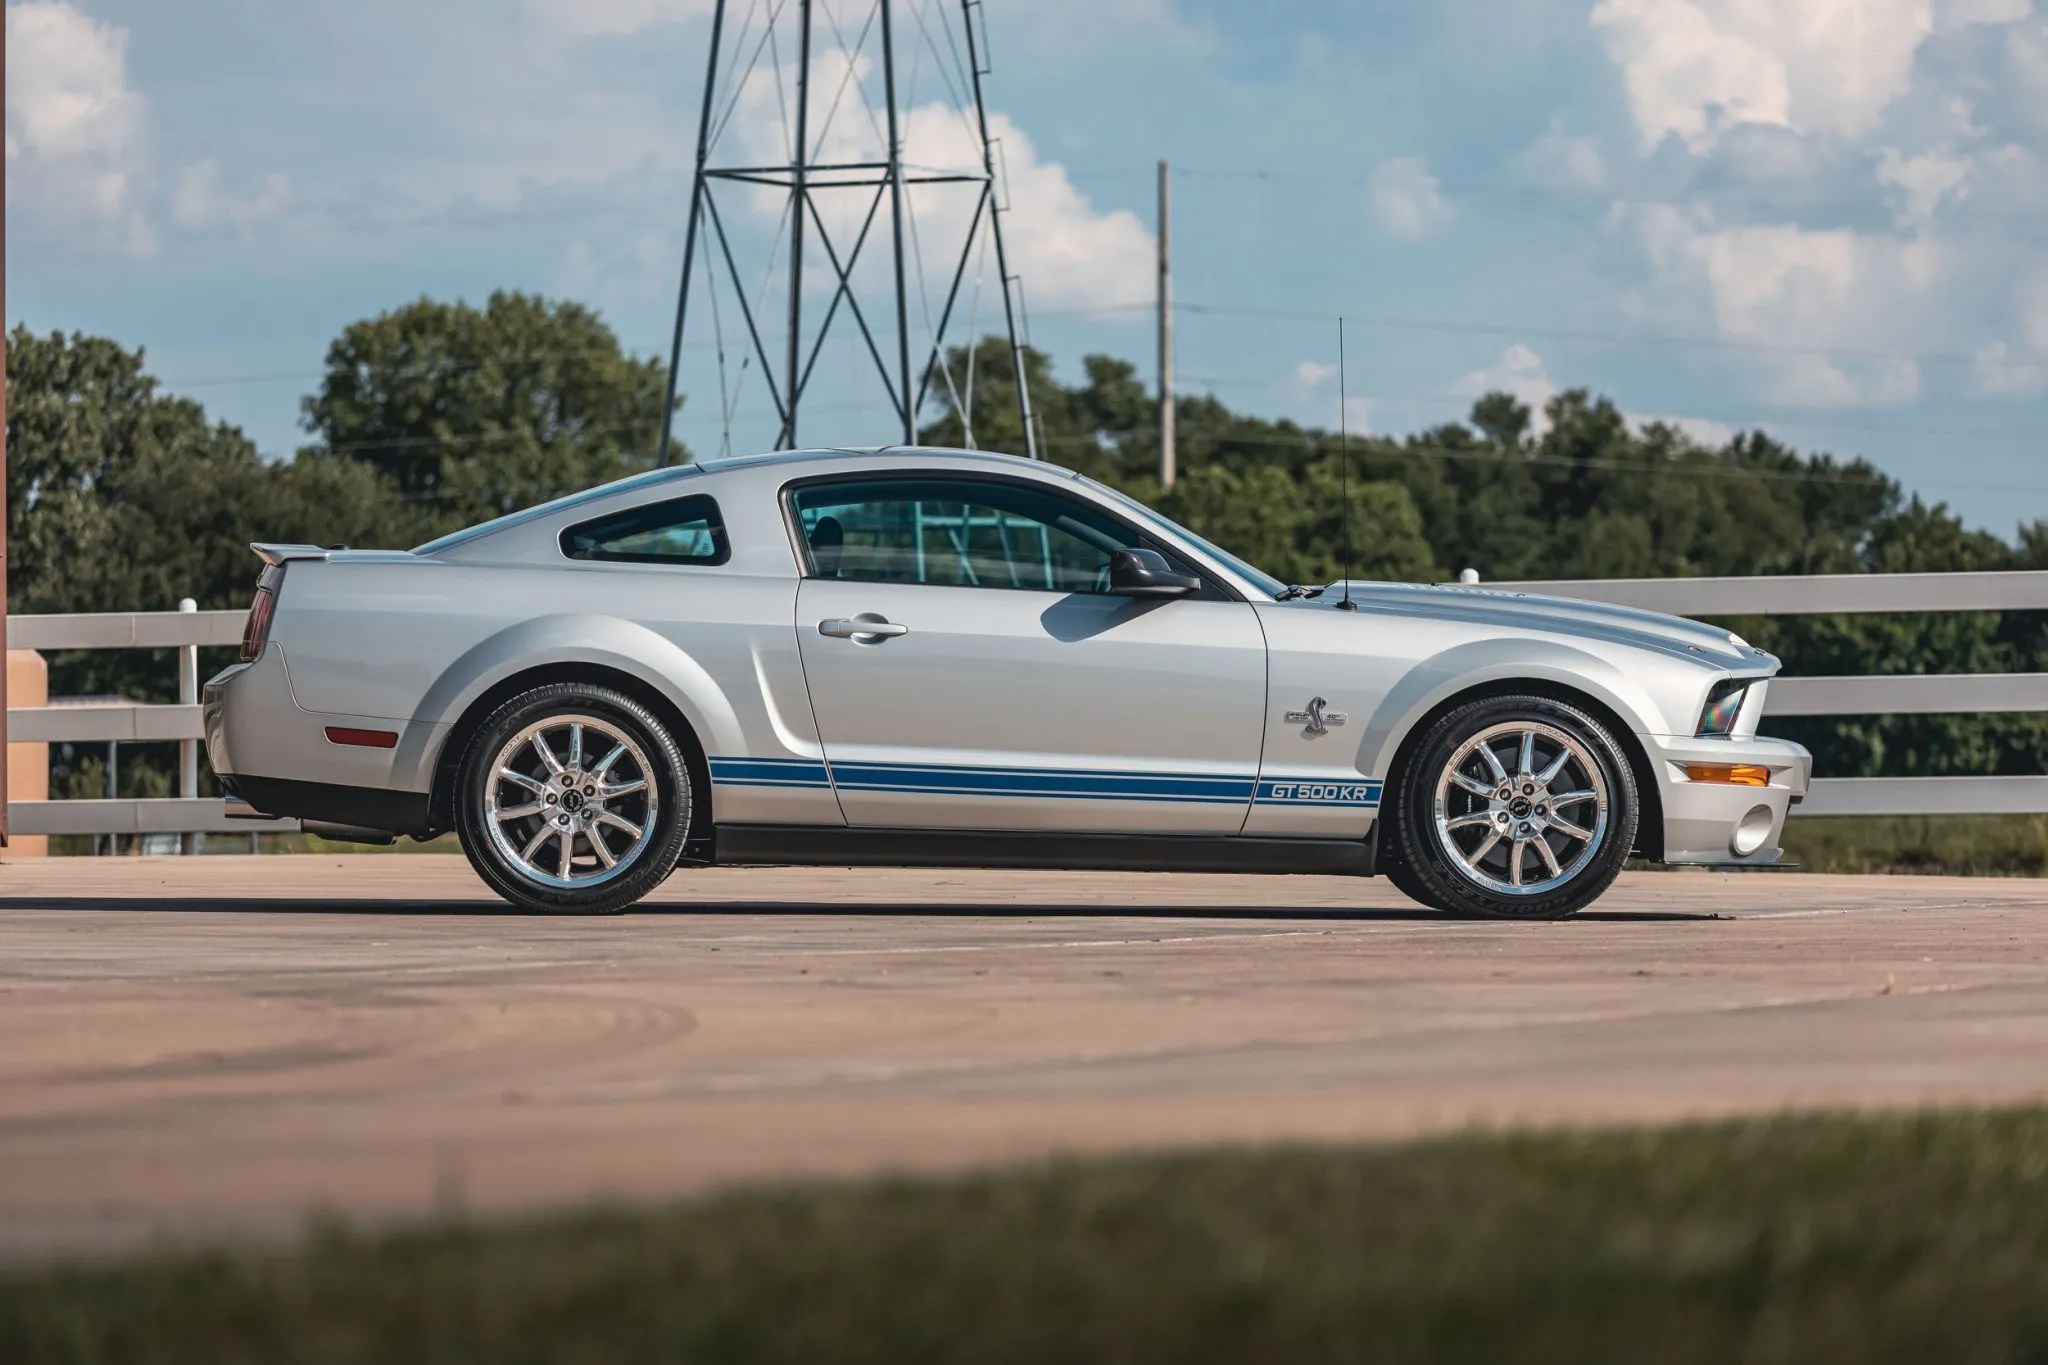 2008 Ford Mustang Shelby GT500KR